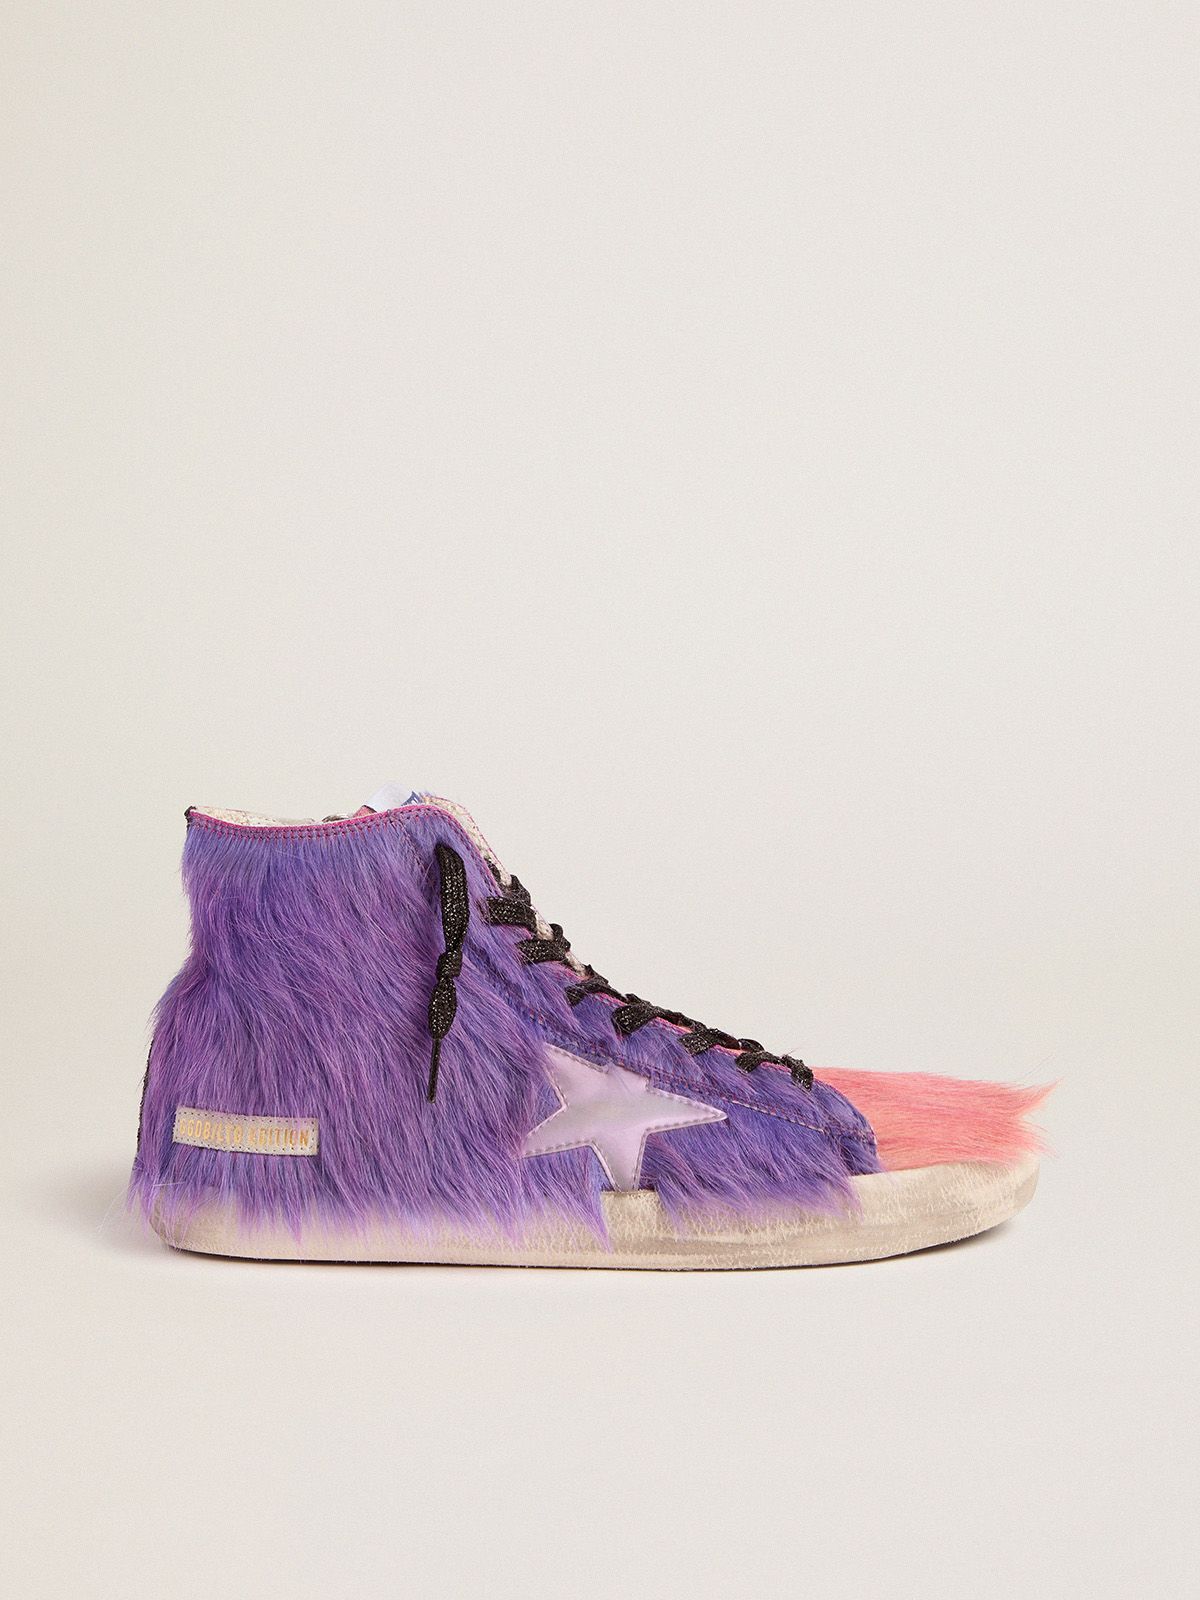 golden goose and Men’s Edition pink pony lilac Limited sneakers skin Francy